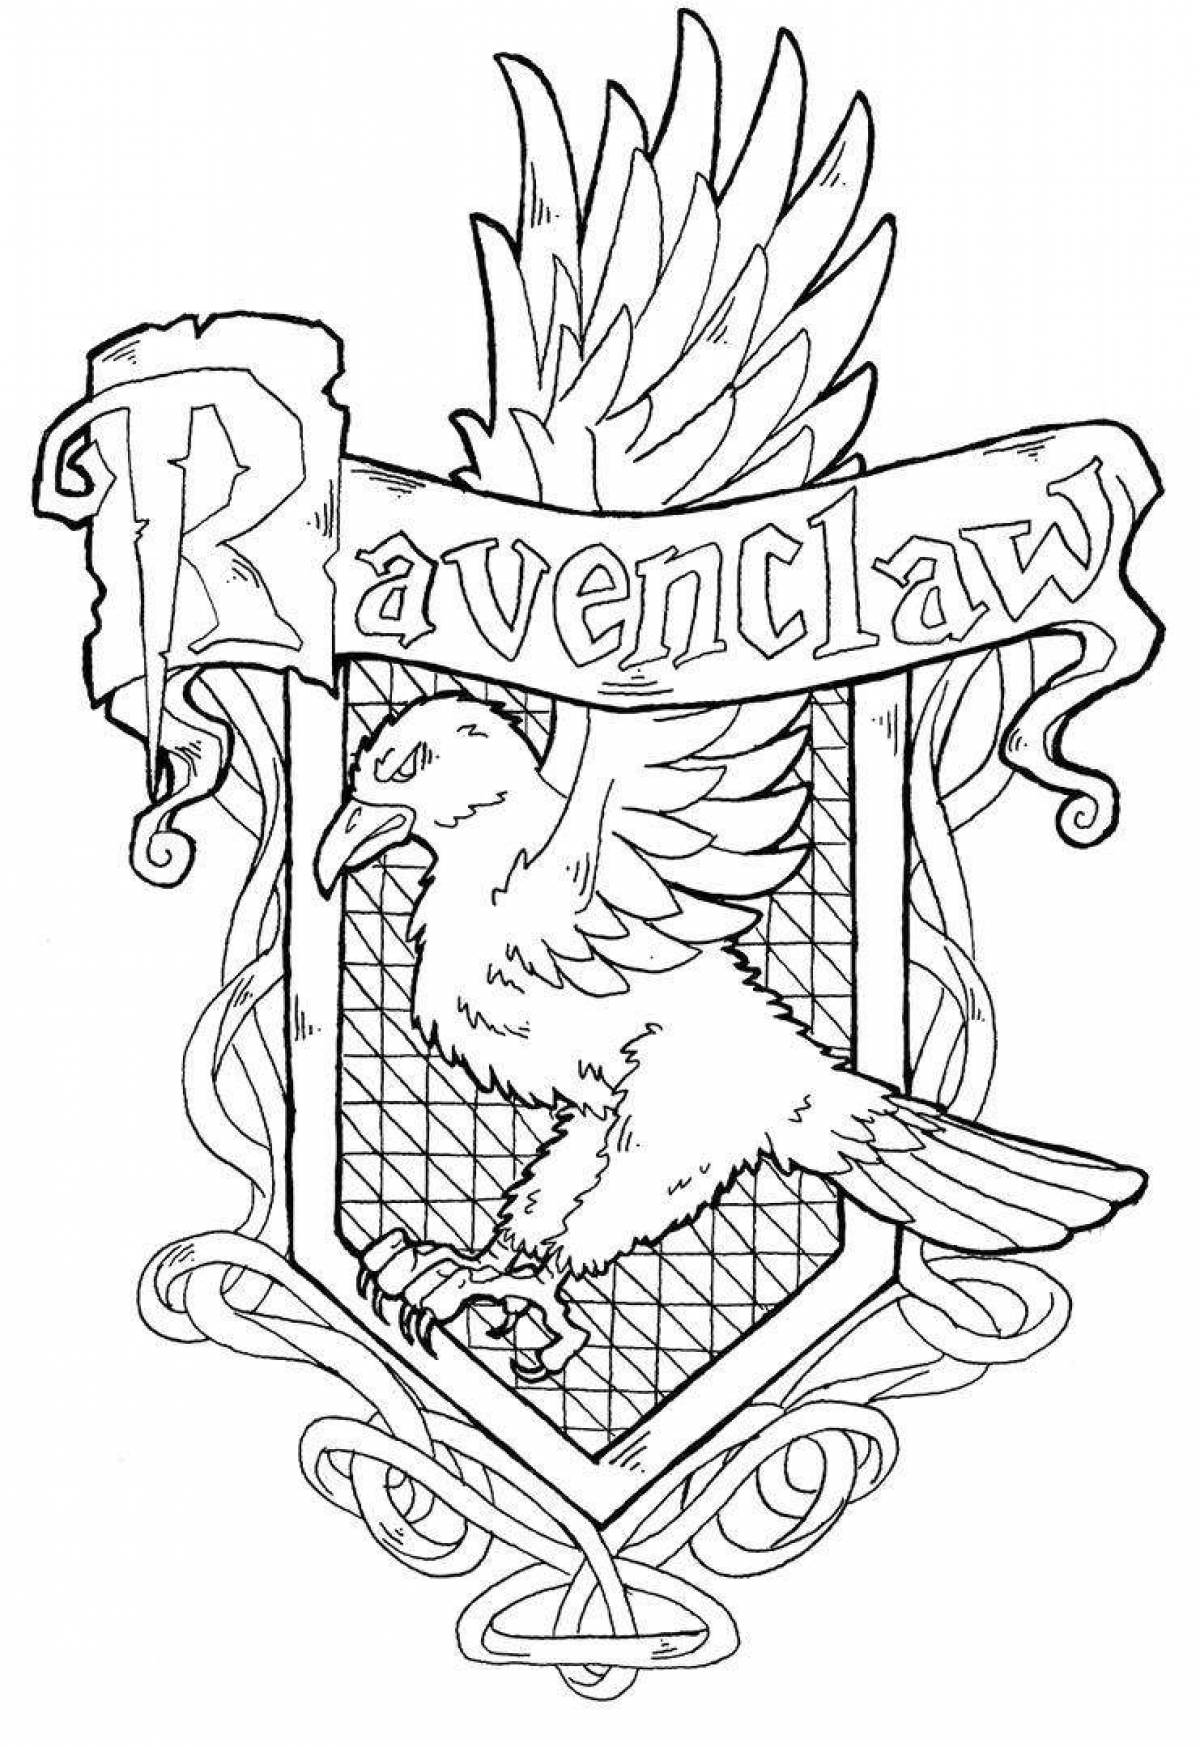 Slytherin's benevolent coat of arms coloring book